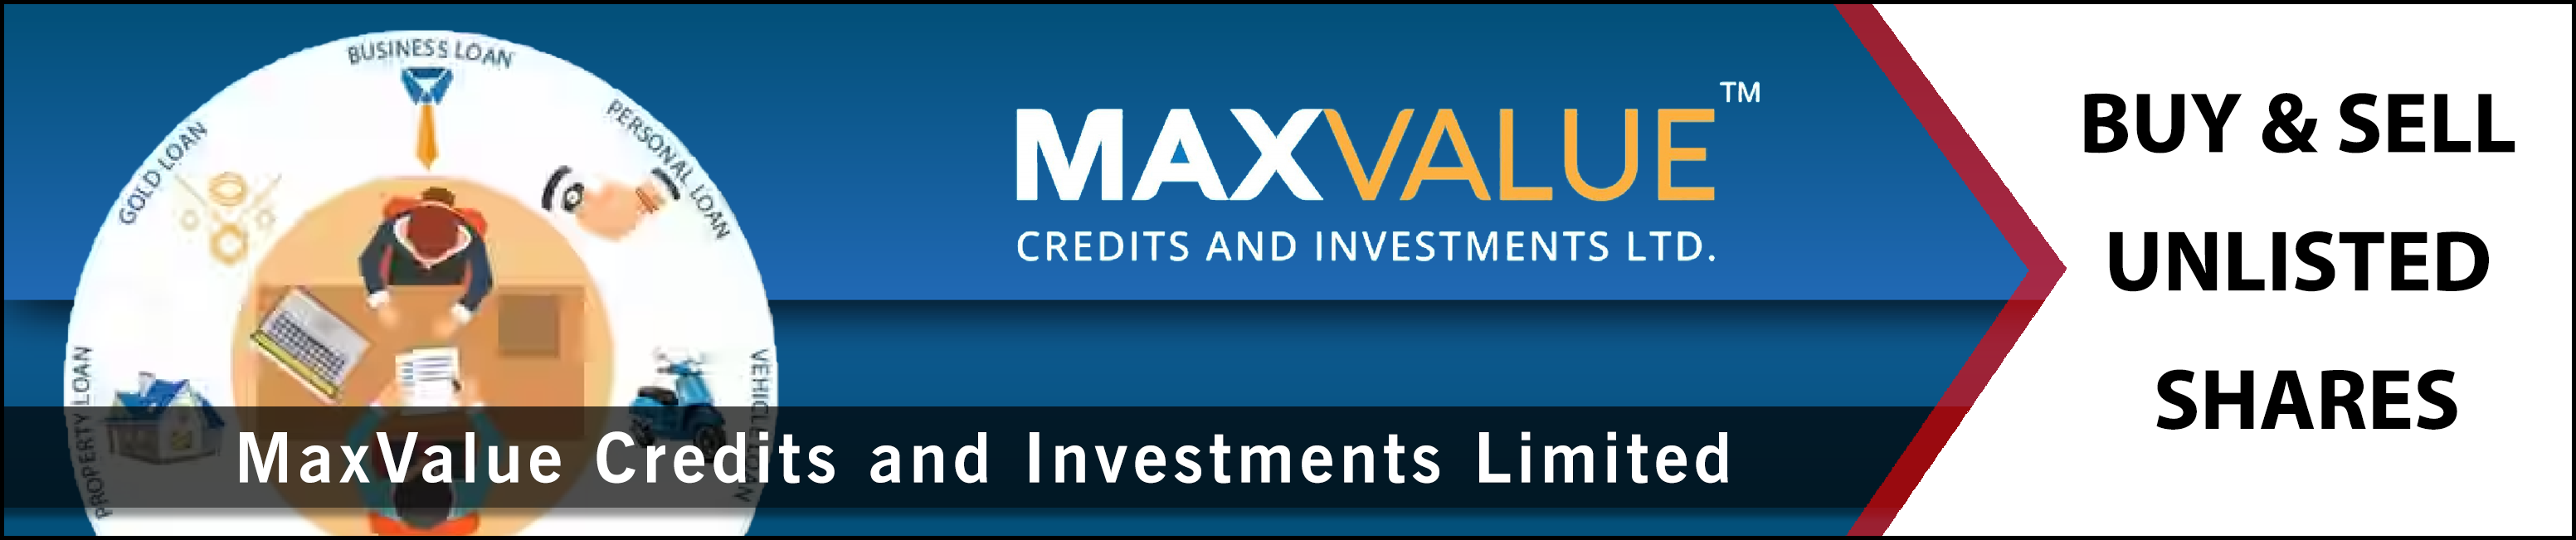 Max Value Credit and Investment Ltd Unlisted Shares